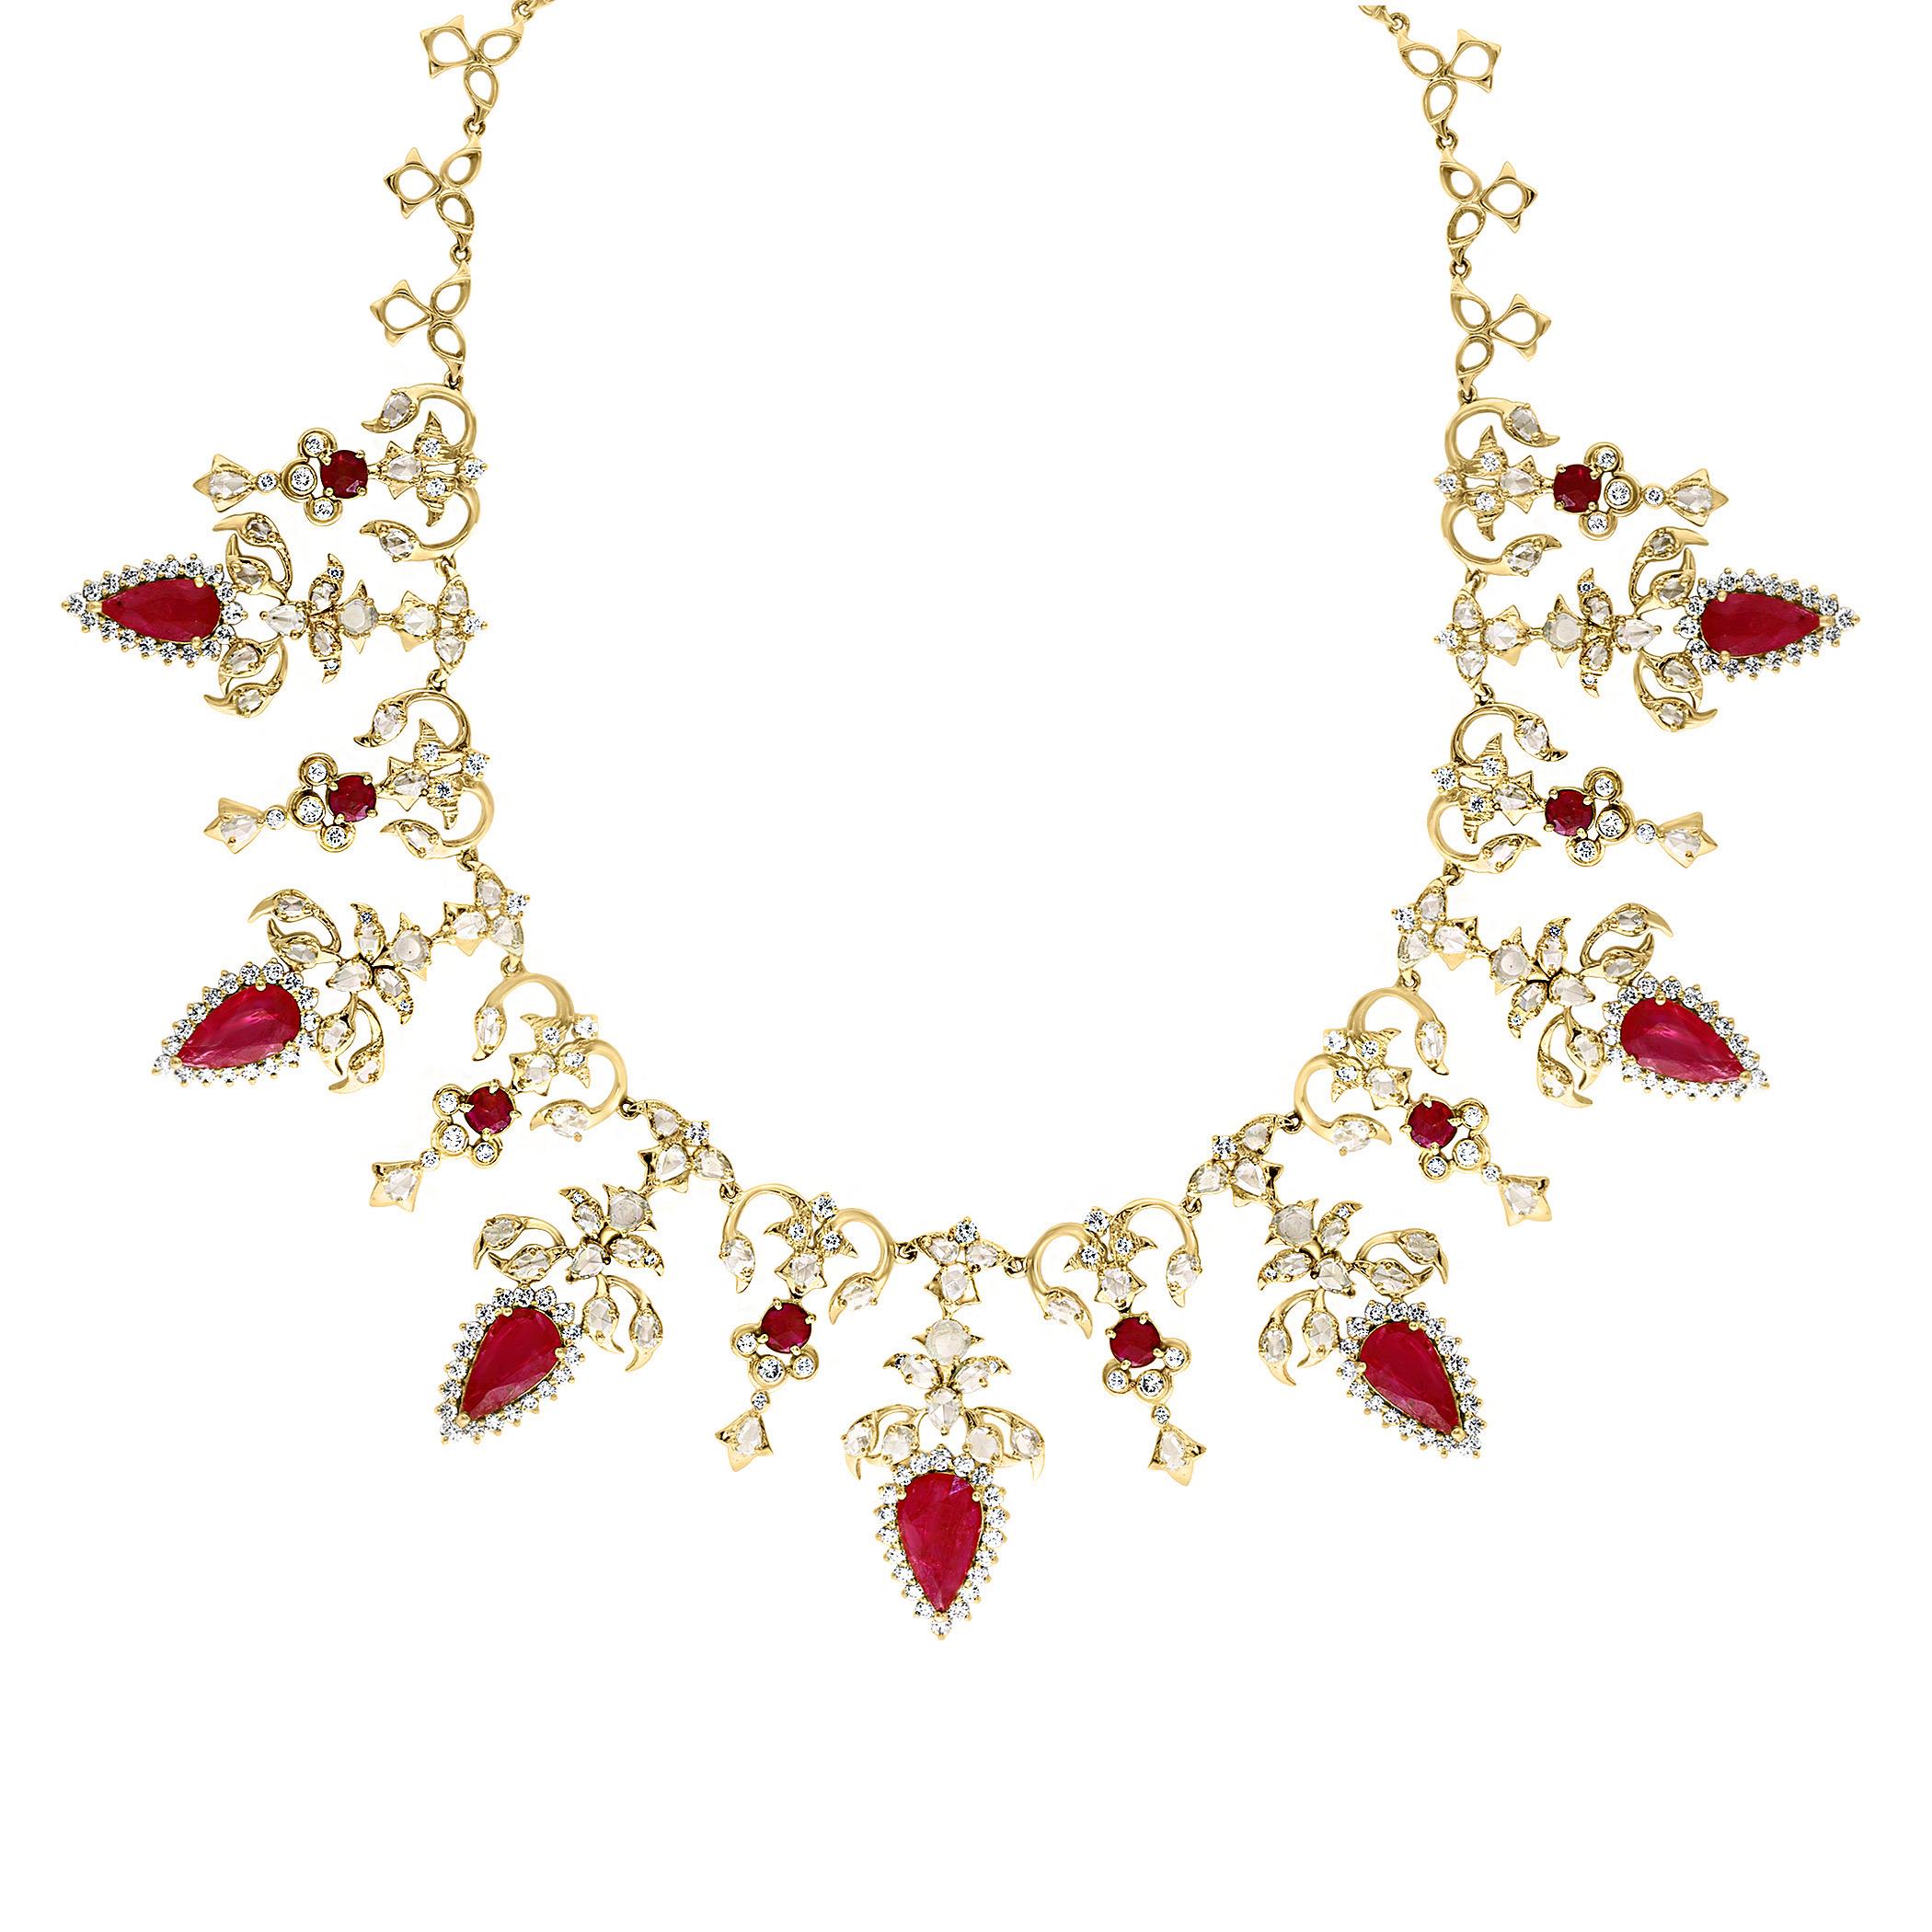 45 Ct Pear Cut Ruby & 22 Ct Rose cut Diamond Necklace Suite 18 Kt Gold, Bridal In Excellent Condition For Sale In New York, NY